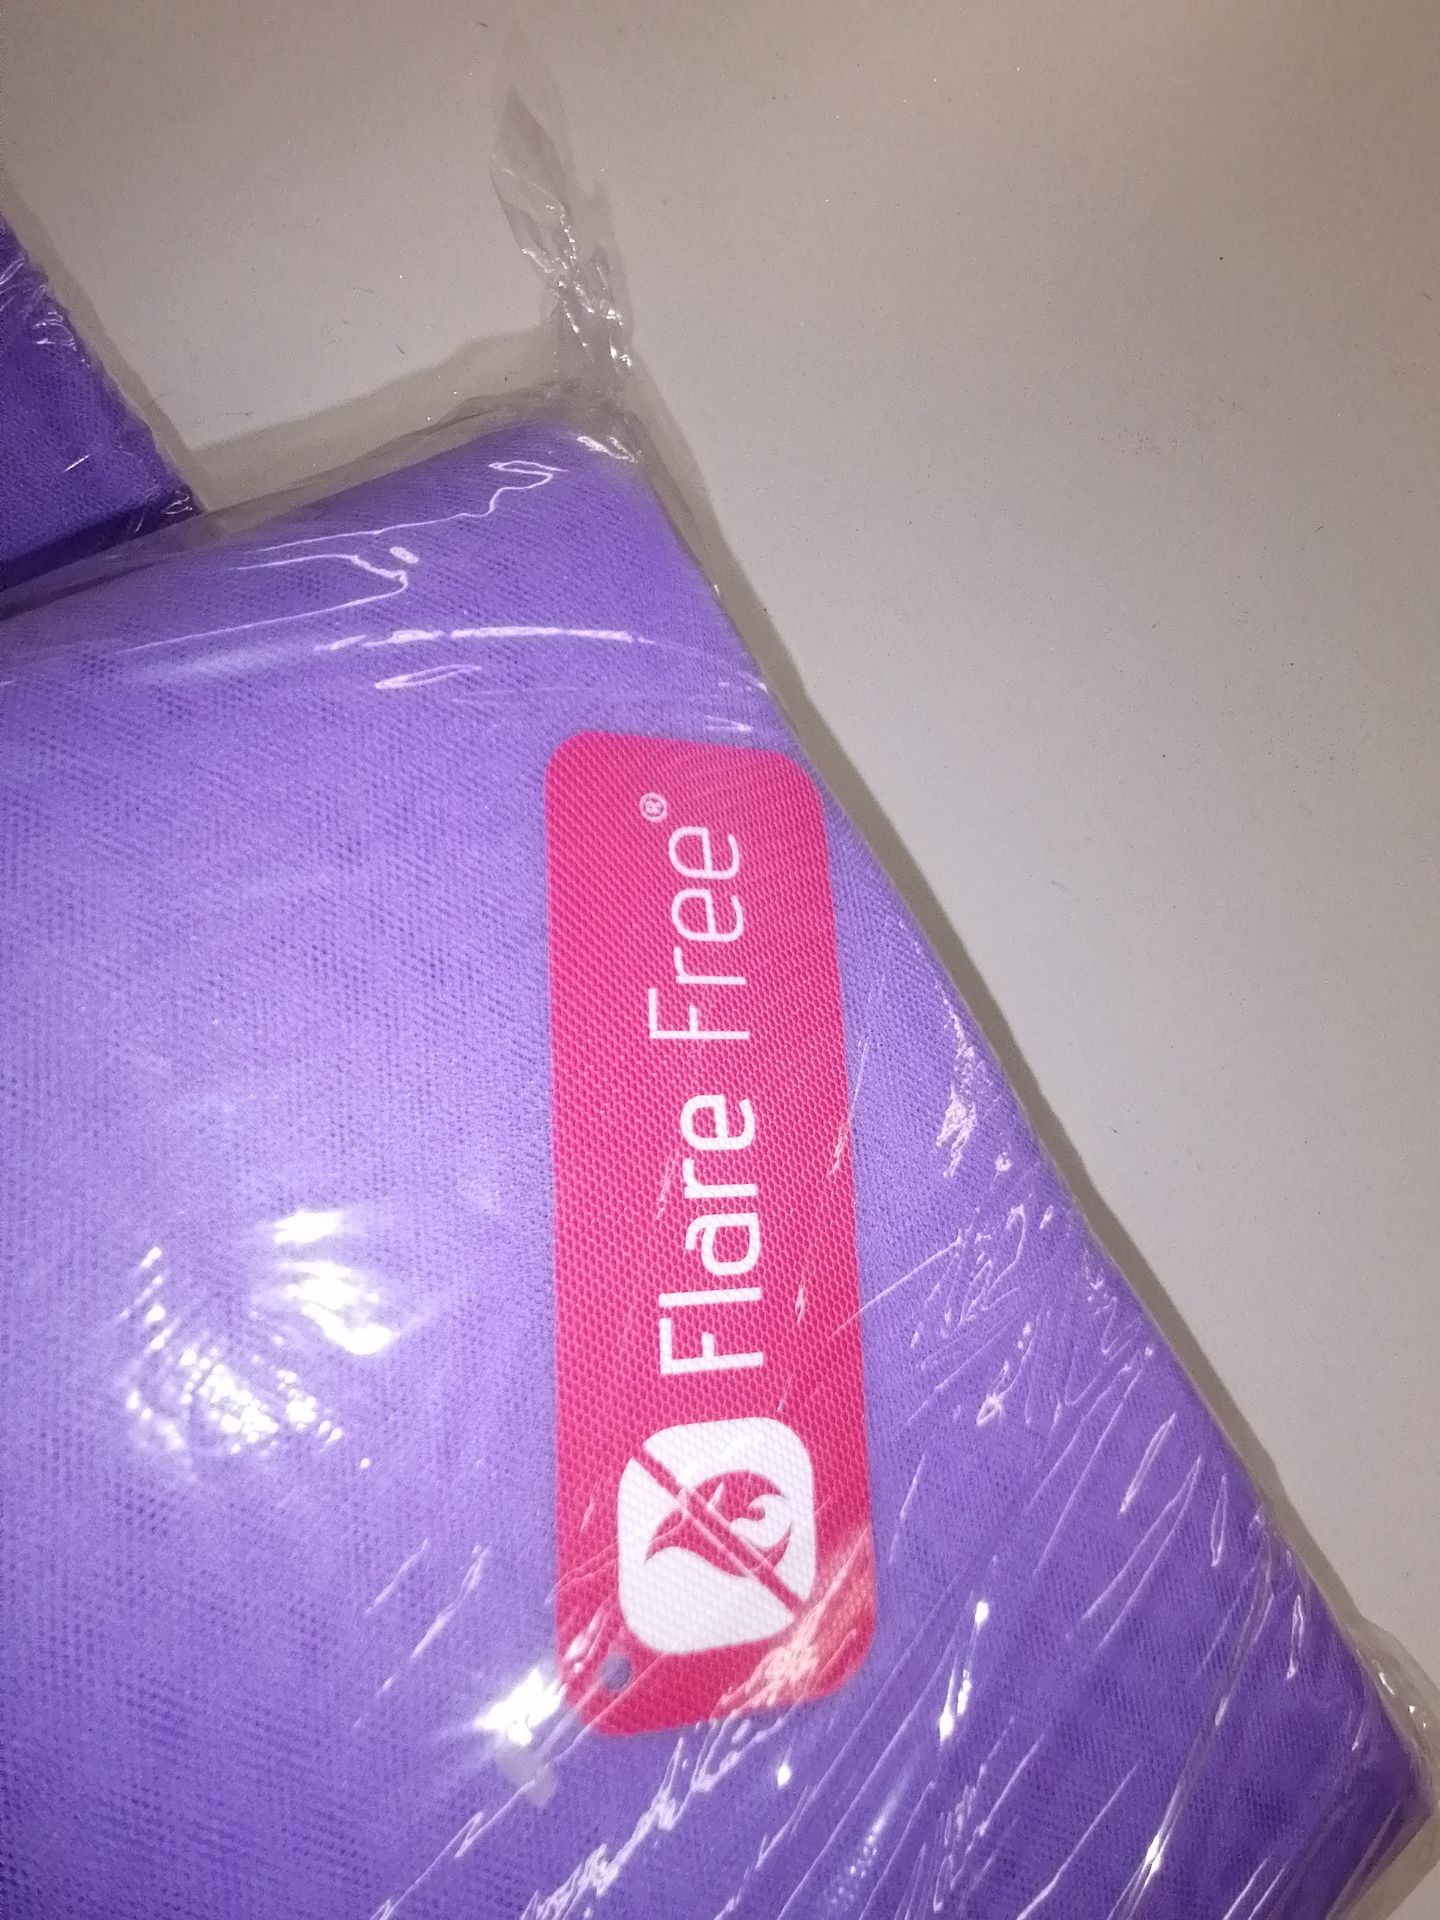 4 x New lilac netting fabric . Width 150cm Estimated 200+ linear meters - Image 4 of 4